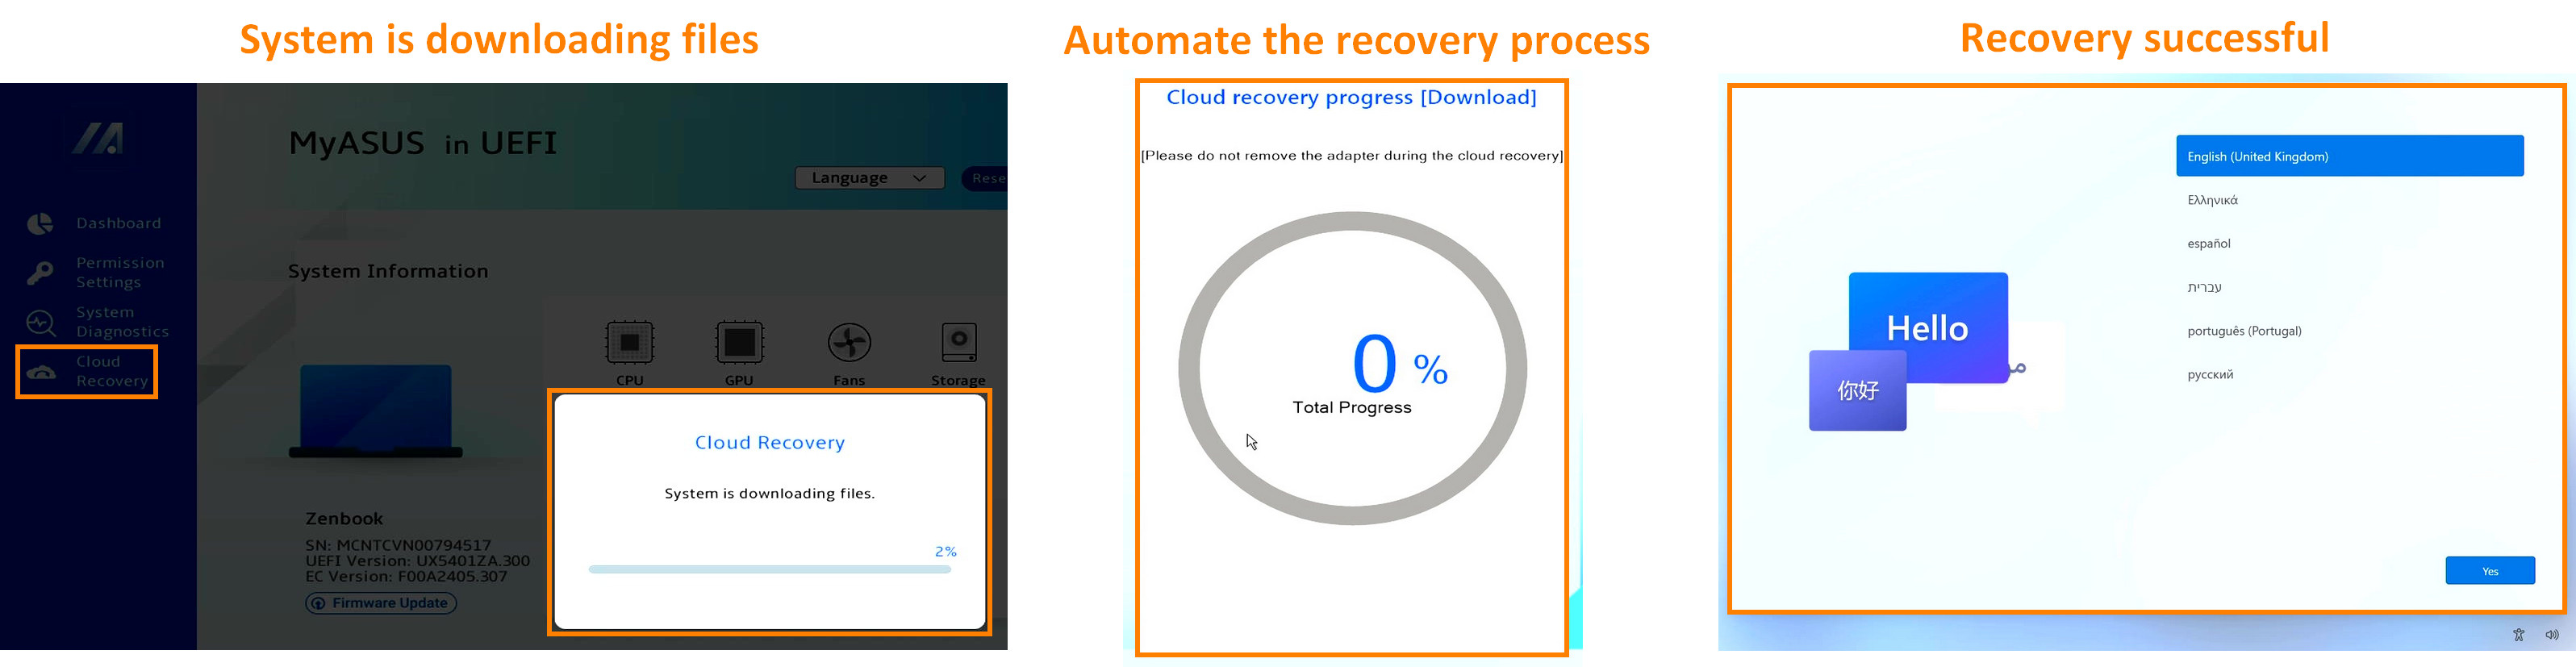 Cloud Recovery in UEFI BIOS - Introduction